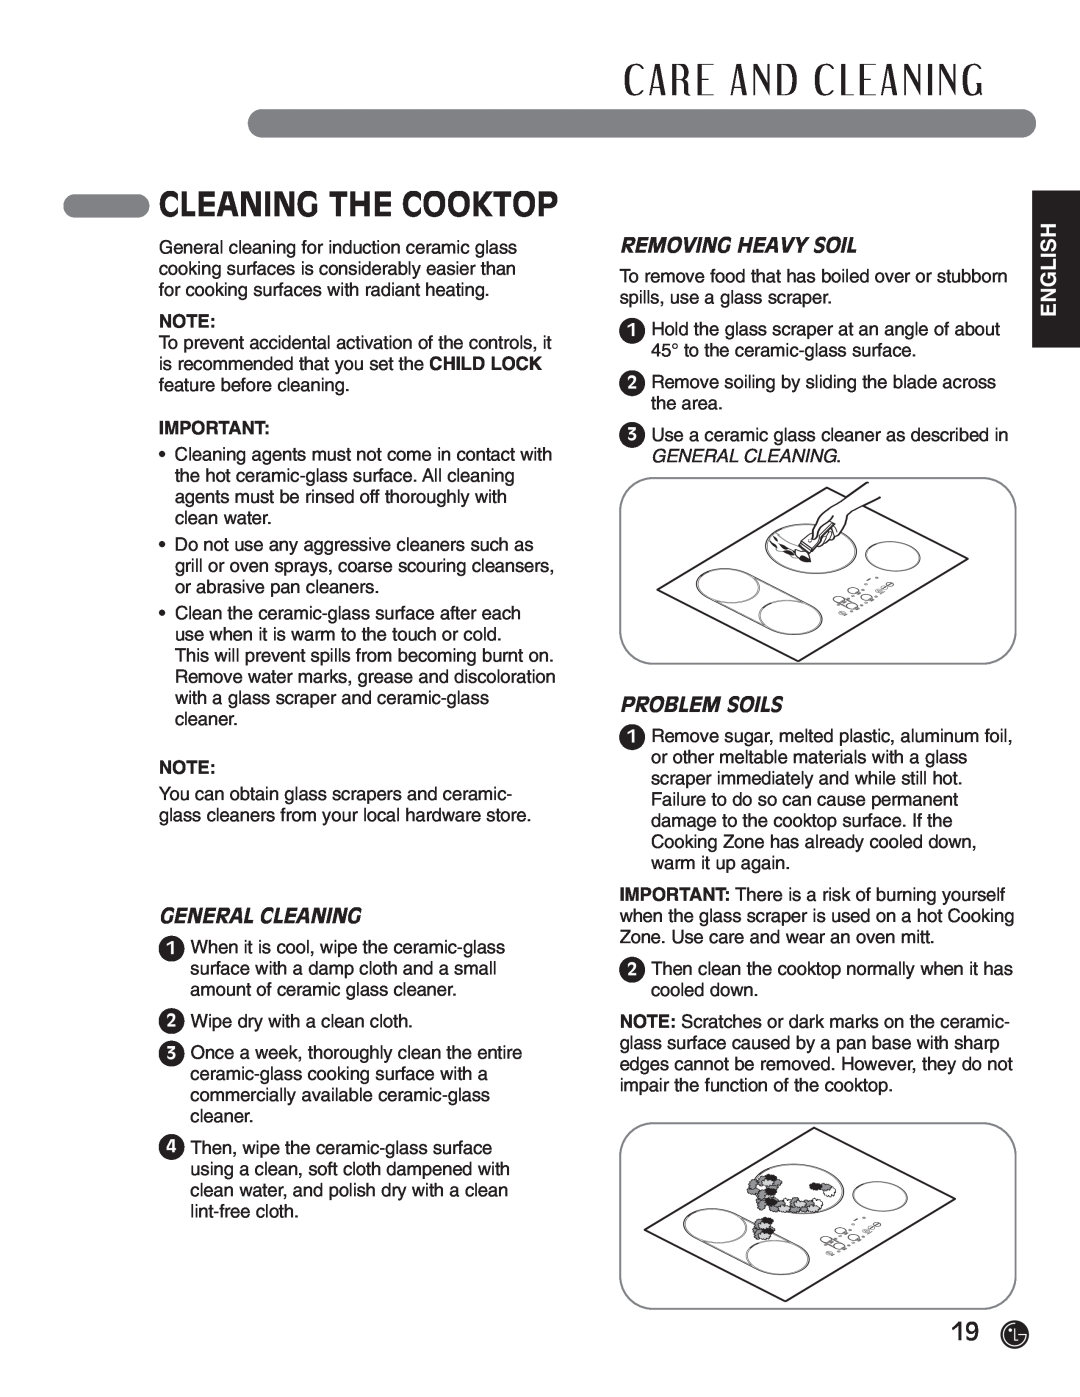 LG Electronics HN7413AG Cleaning The Cooktop, C A R E A N D C L E A N I N G, General Cleaning, Removing Heavy Soil 